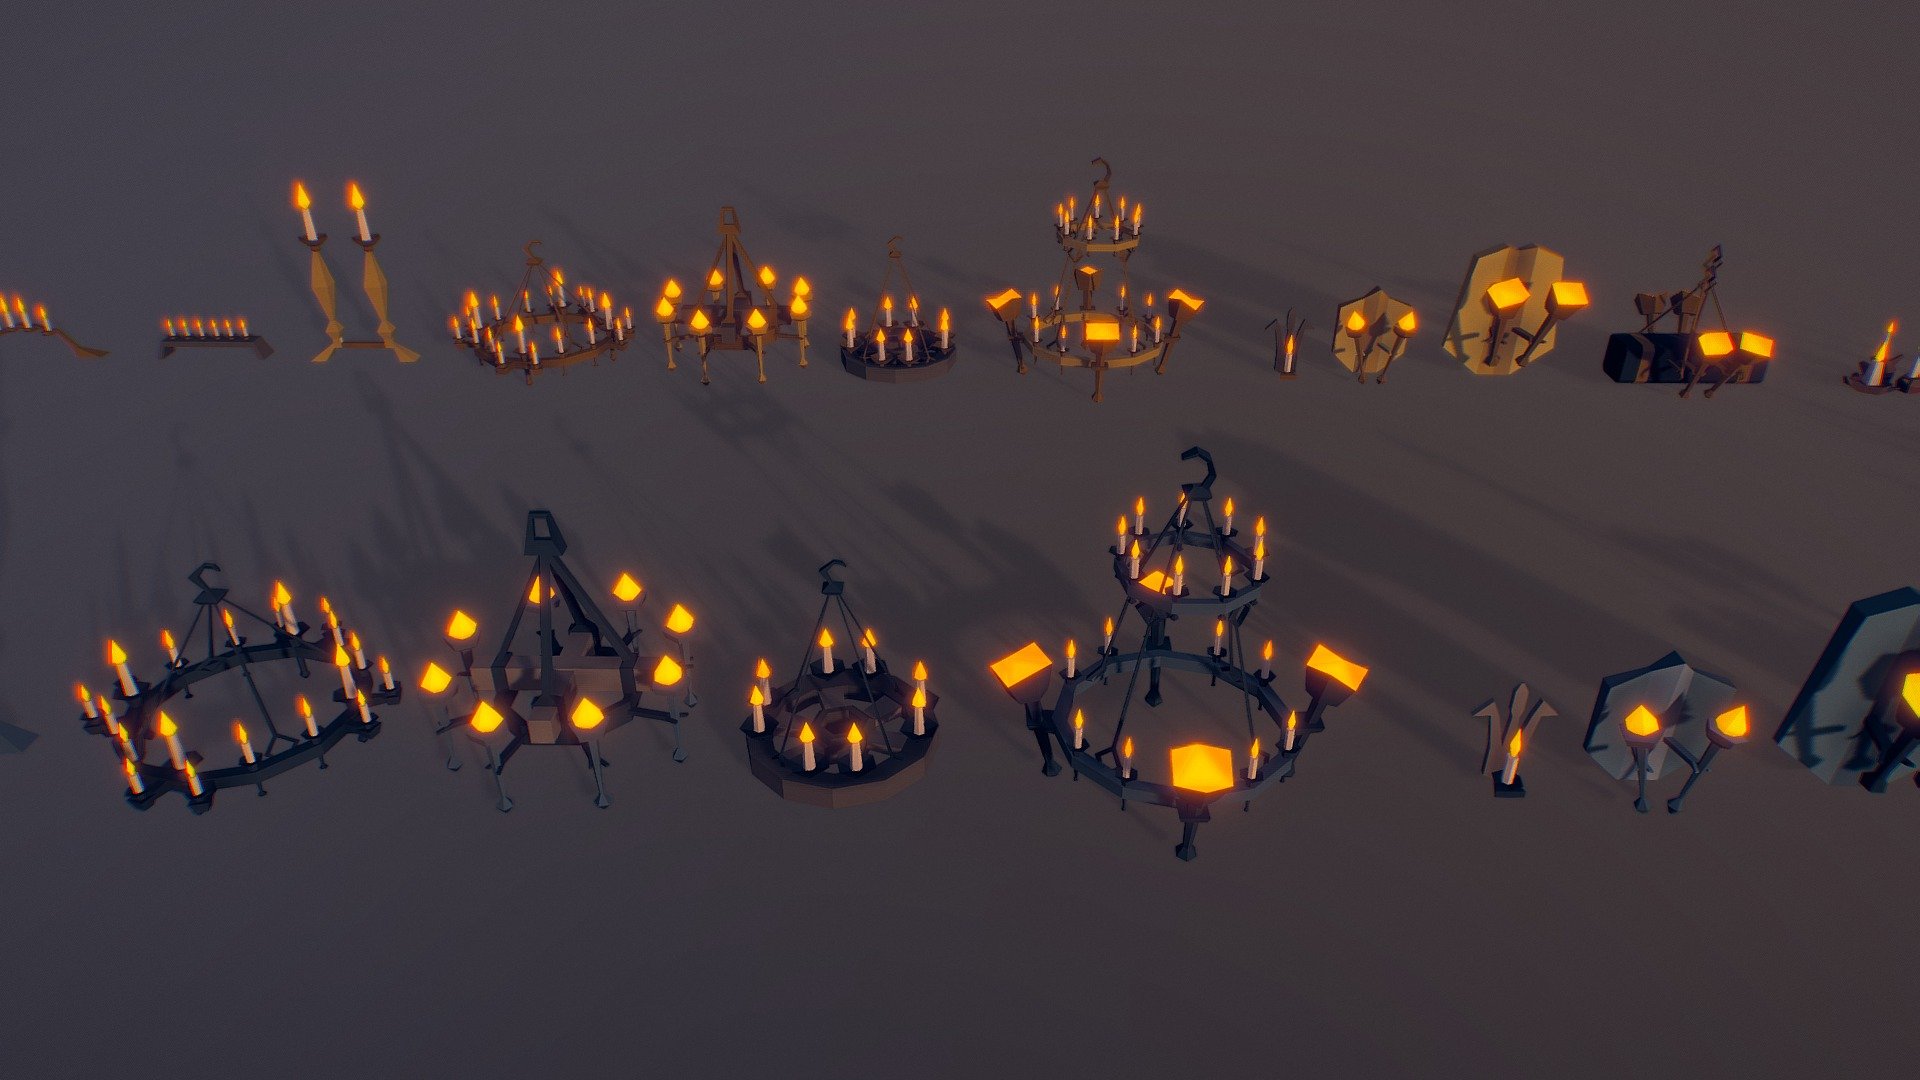 This set includes 20 optimized models of chandeliers, sconces, kerosene lamps, bunches of dried garlic  and candles. Each model in 2 or 4 color sets are in the RAR file (fbx). Full list of all models:





Chandelier (Var 1, 1 354 polygons)







Chandelier (Var 2, 636 polygons)







Chandelier (Var 3, 577 polygons)







Chandelier (Var 4, 1 170 polygons)







Chandelier (Var 5, 488 polygons)







Sconces (Var 1, 94 polygons)







Sconces (Var 2, 108 polygons)







Sconces (Var 3, 128 polygons)







Candelabrum (Var 1, 146 polygons)







Candelabrum (Var 2, 238 polygons)







Candelabrum (Var 3, 134 polygons)







Kerosene Lamp (97 polygons)







Candle (Var 1, 46 polygons)







Candle (Var 2, 38 polygons)







Candle (Var 3, 44 polygons)







Several Candles (248 polygons)







Bunch of Dried Garlic (458 polygons)







Bunch of Dried Garlic (296 polygons)







Bunch of Dried Garlic (212 polygons)







Bunch of Dried Garlic (76 polygons)


 - Chandeliers and Candles ( Low Poly ) - 3D model by Larolei Low Poly (@strix567) 3d model